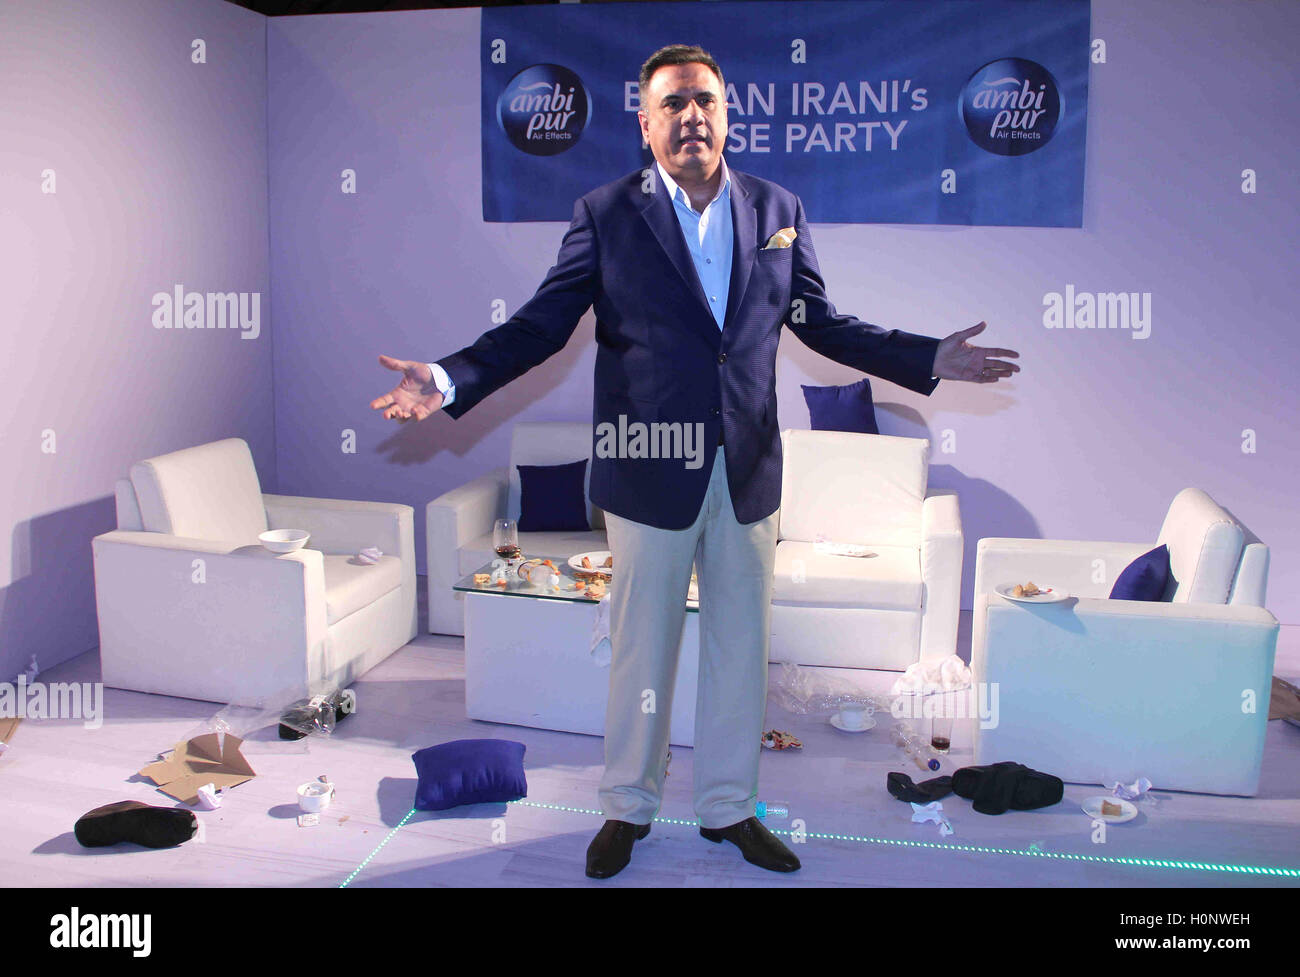 Bollywood actor Boman Irani during a promotional event by Ambi Pur, in Mumbai, India on September 13, 2016. Stock Photo